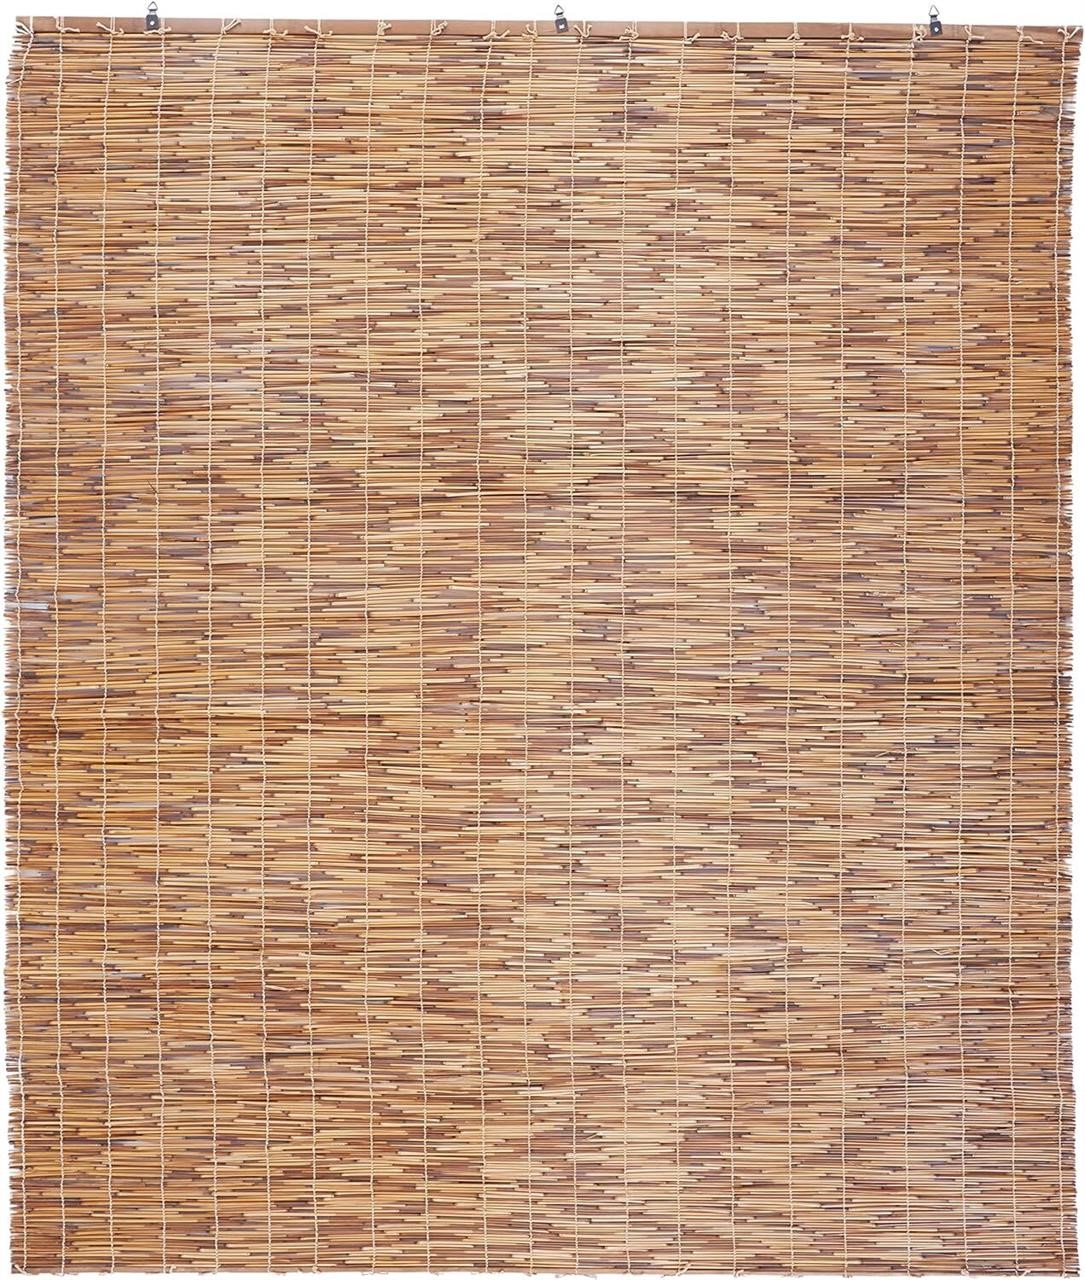 60x72 Cord-Free Bamboo Roll-Up Blinds